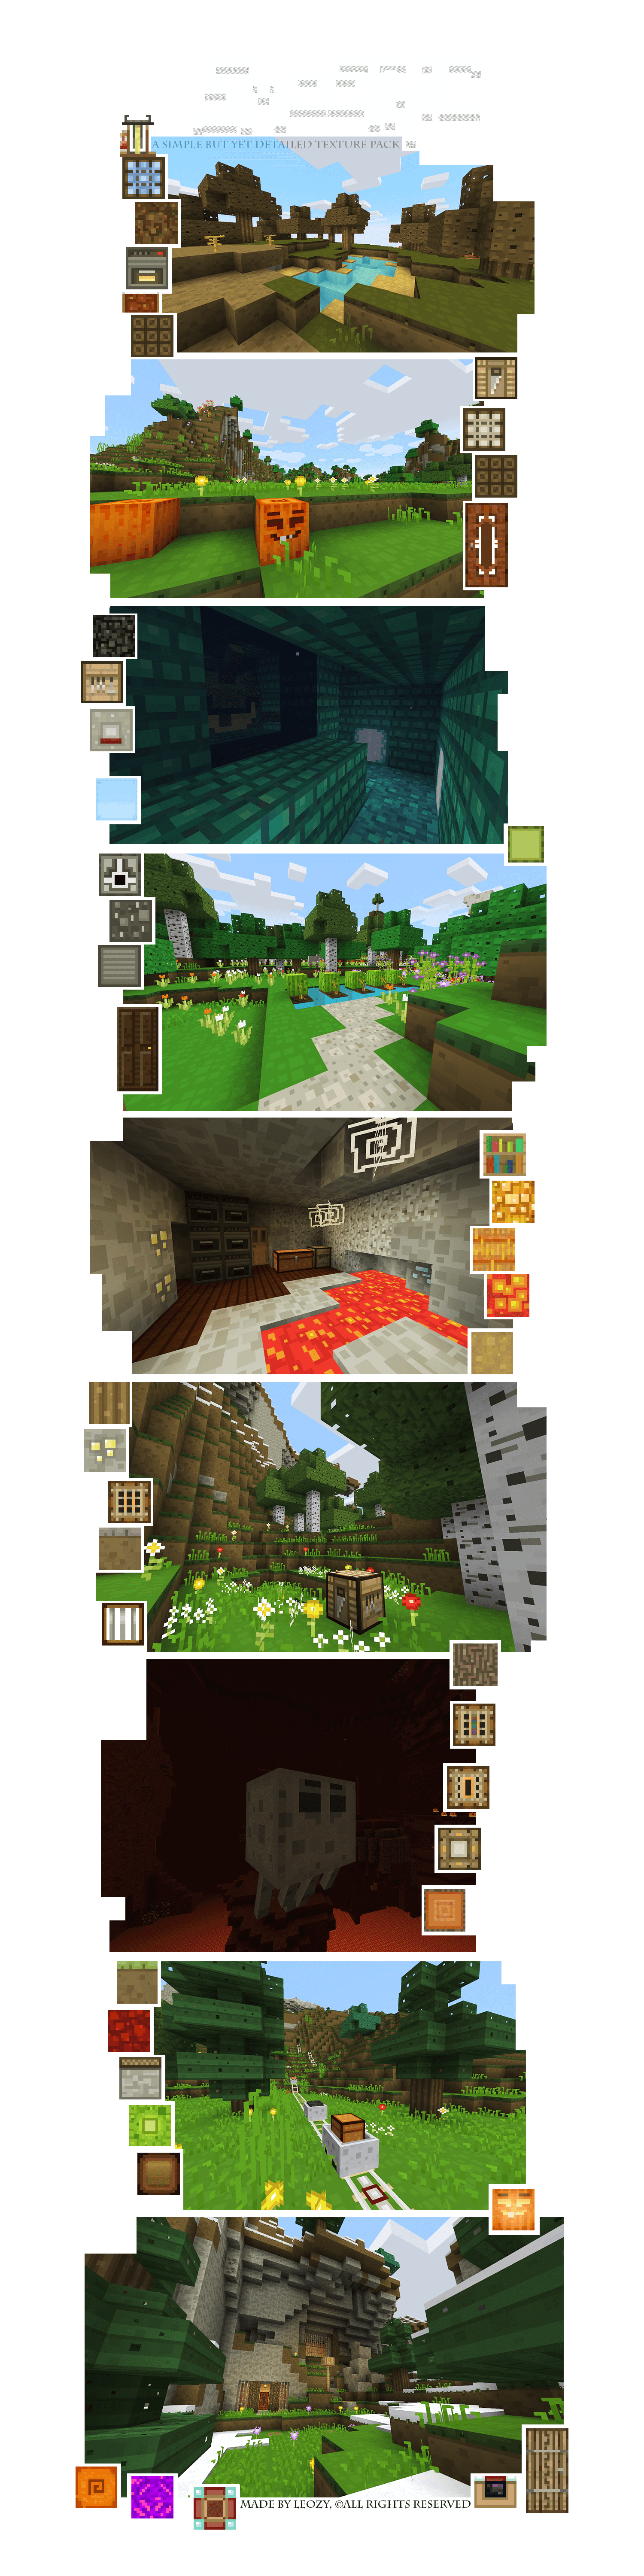 Smoothic Texture Pack Image 1